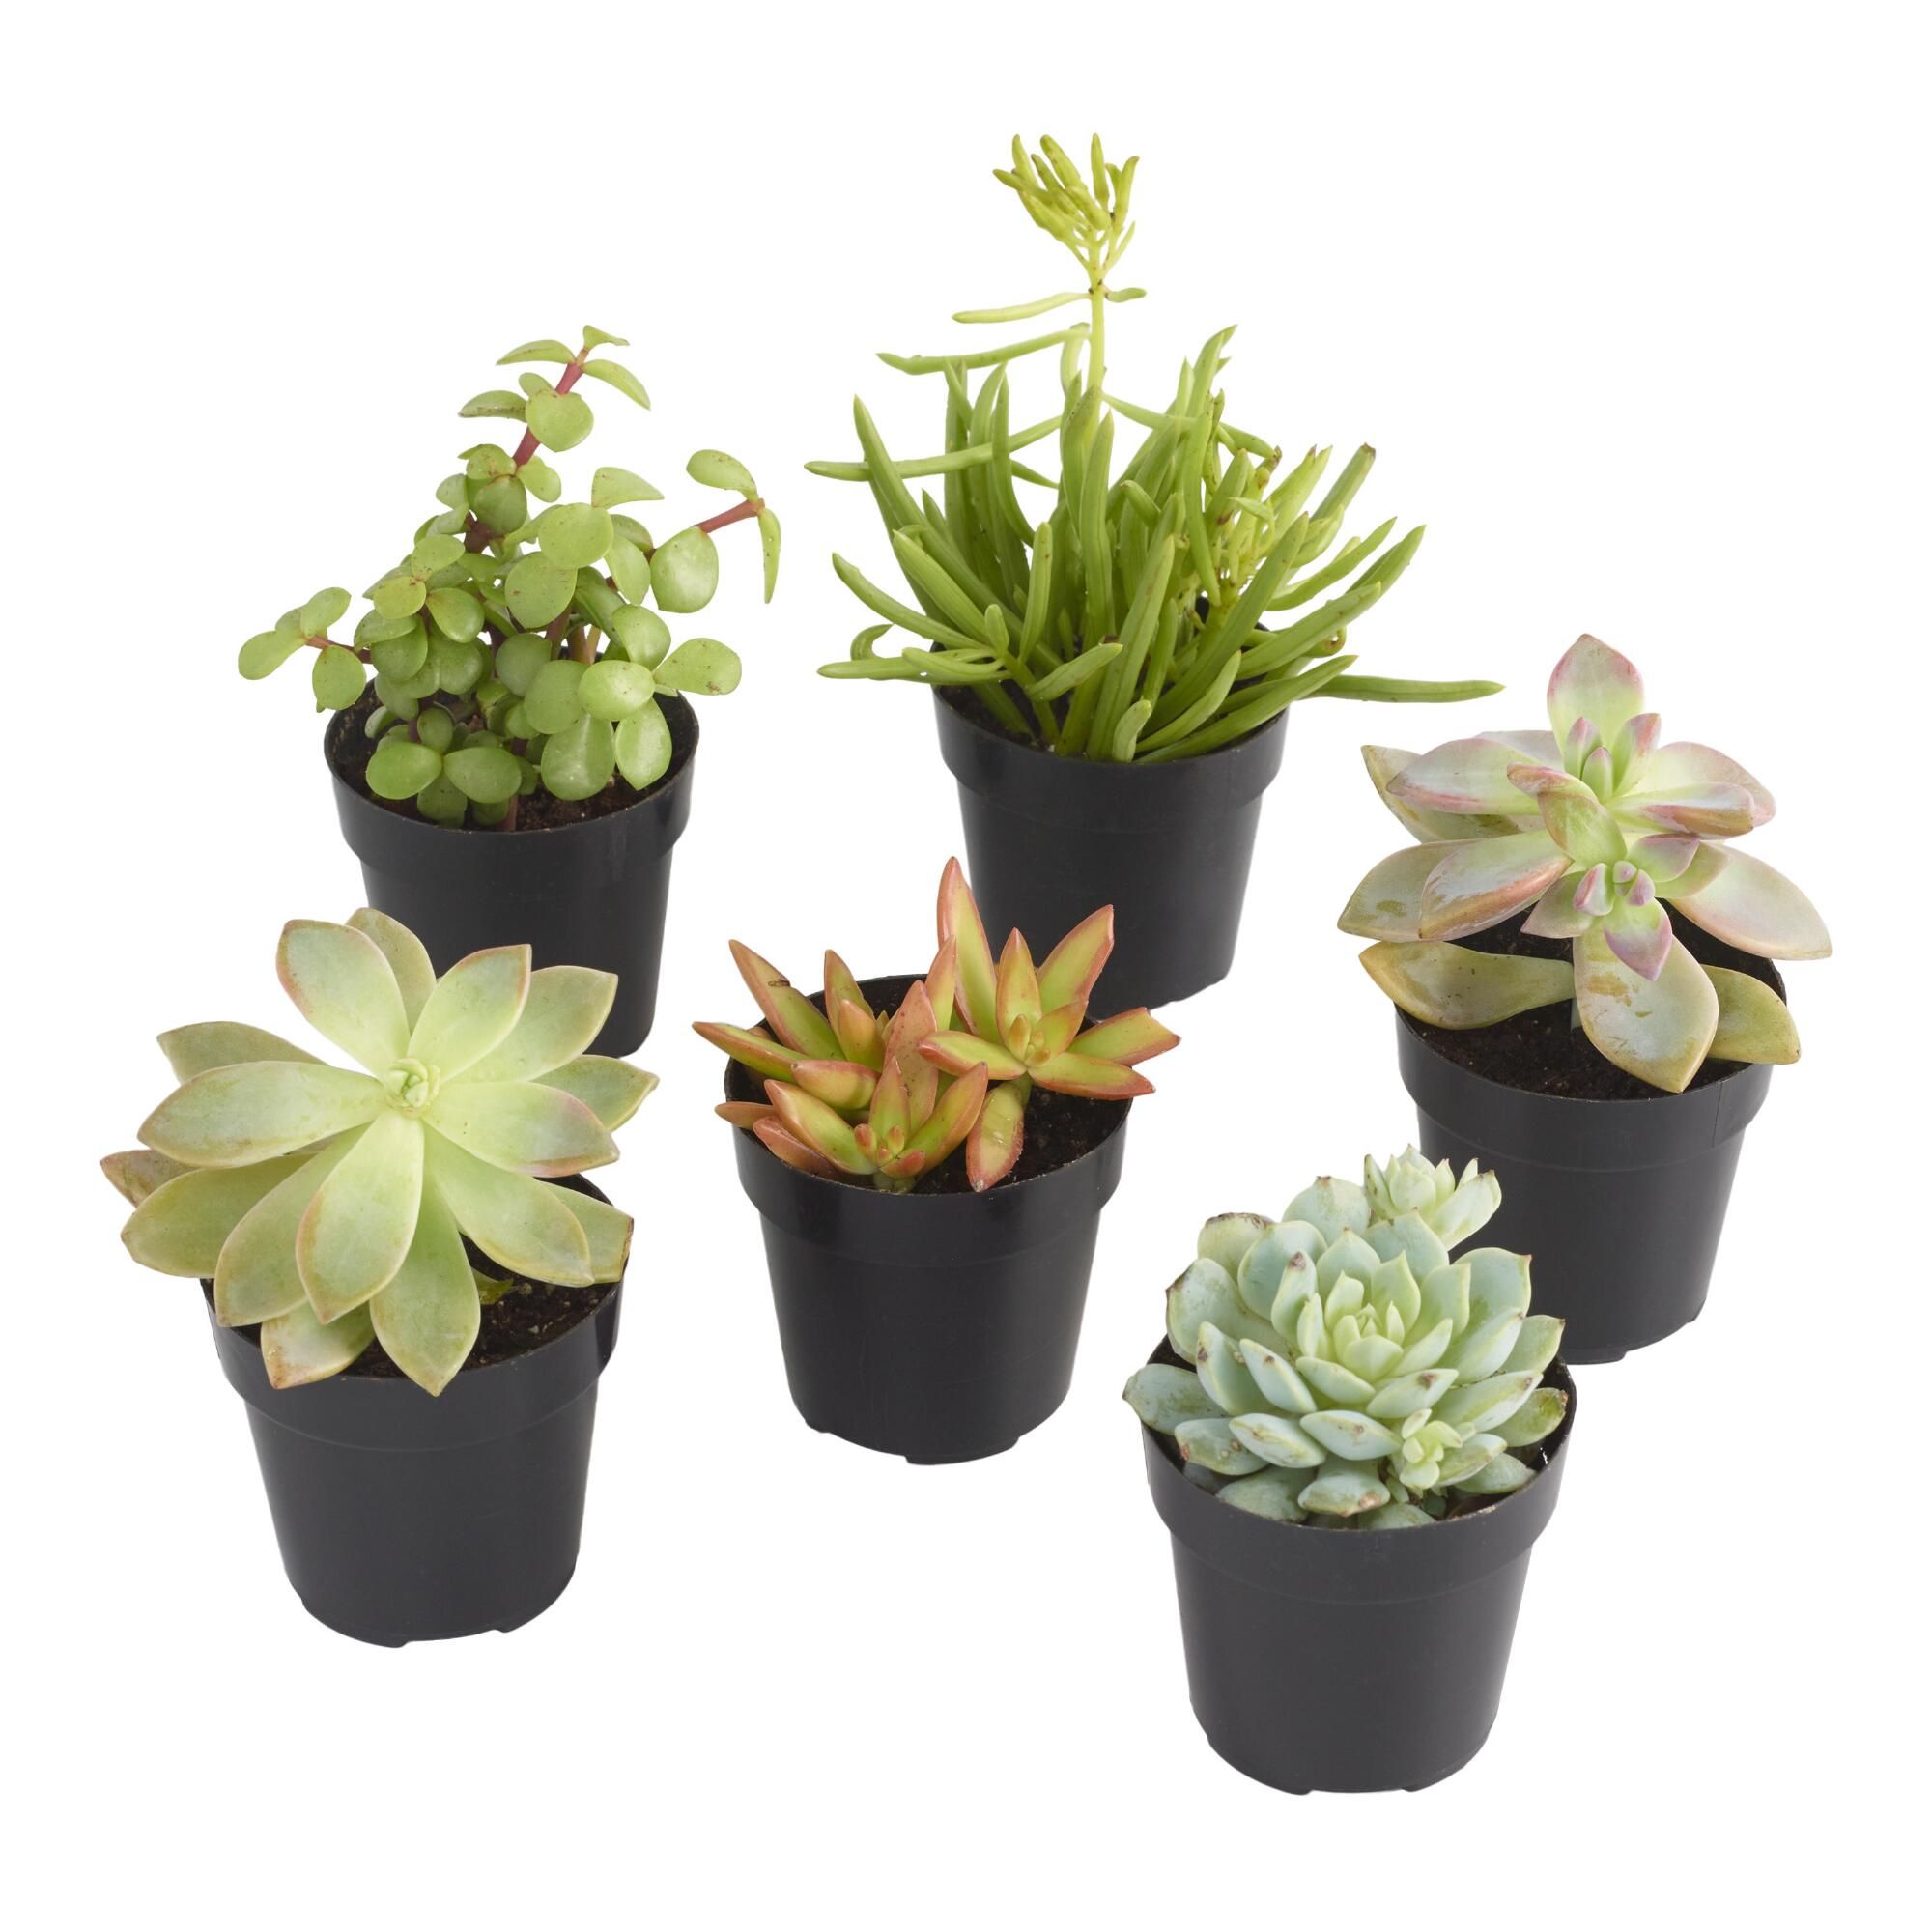 Small Assorted Live Potted Succulents - Smallsetof3 by World Market Smallsetof3 | World Market